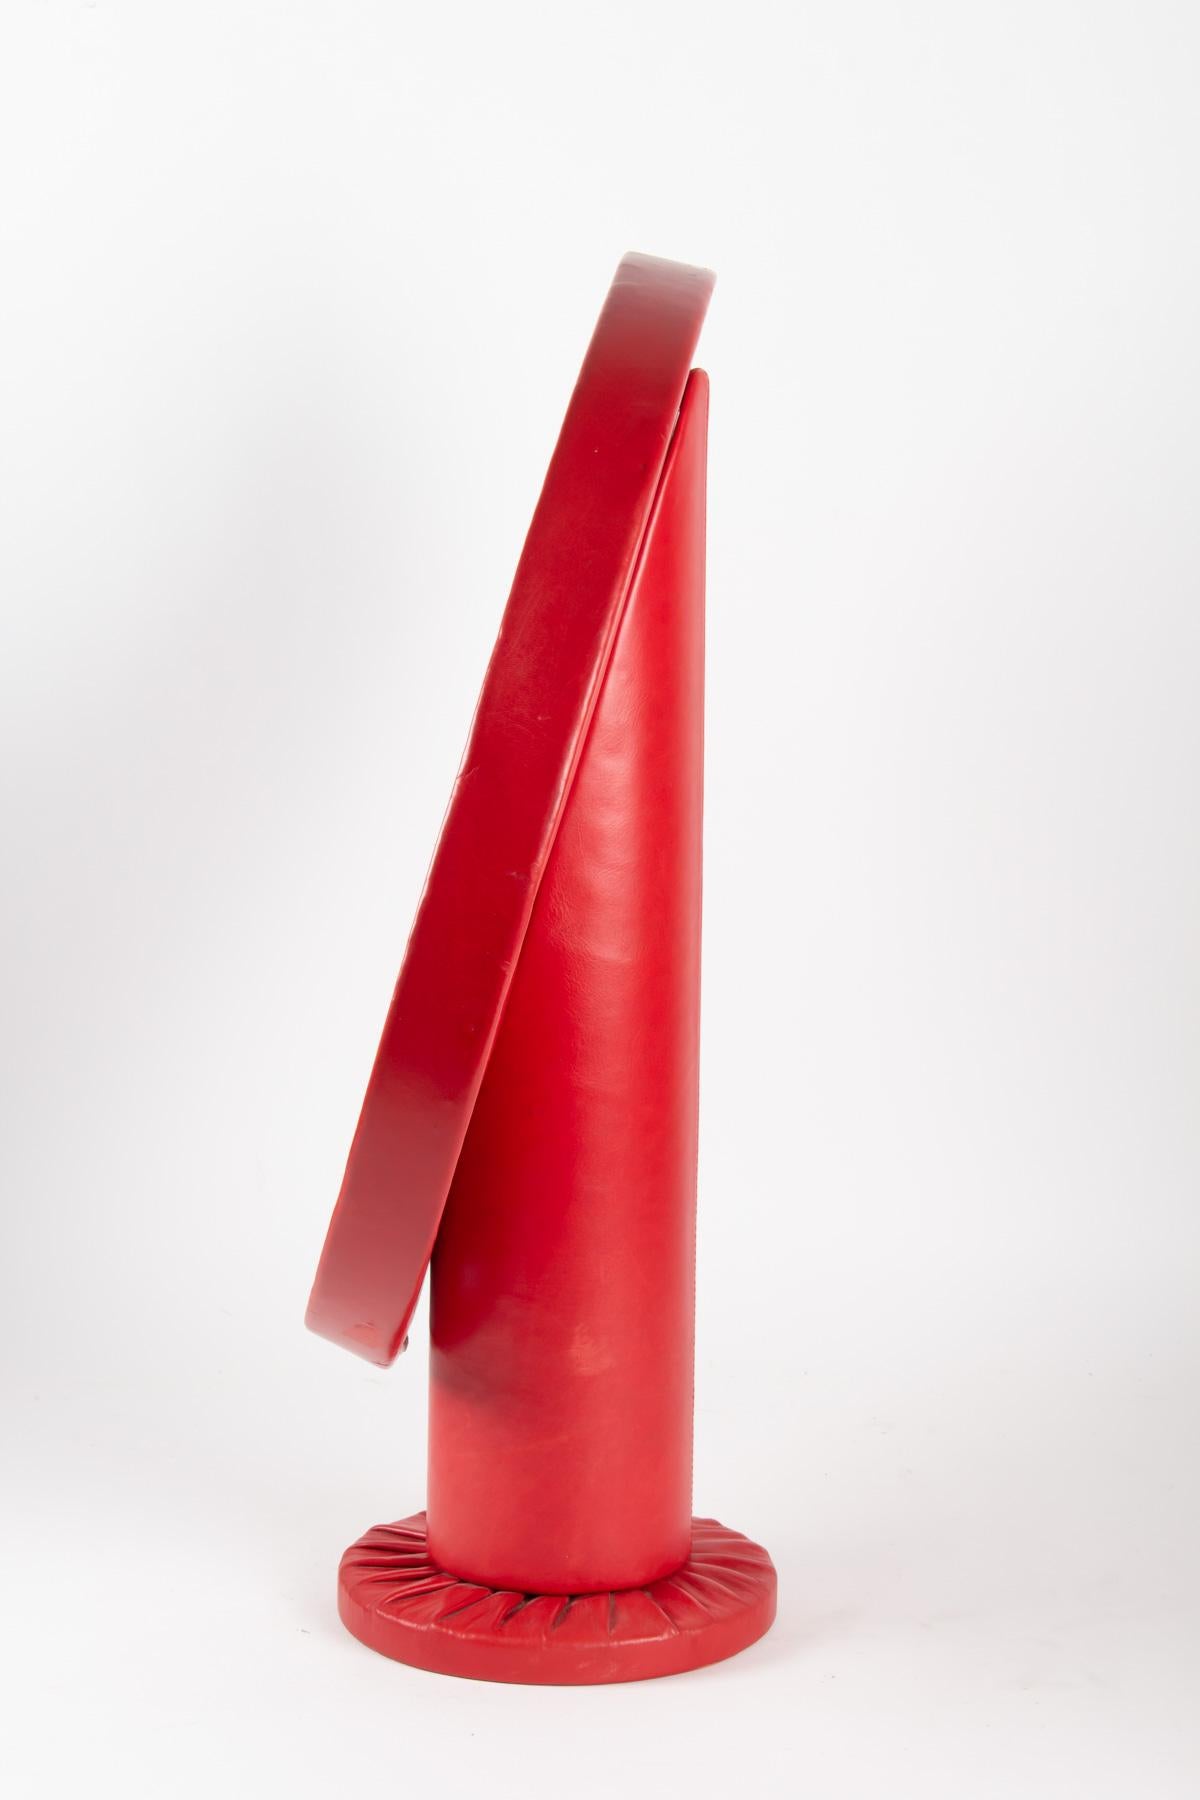 Adjustable mirror, red leather coated, design 1950, attributed to Jacques Adnet.
Measures: H 66cm, D 50cm.